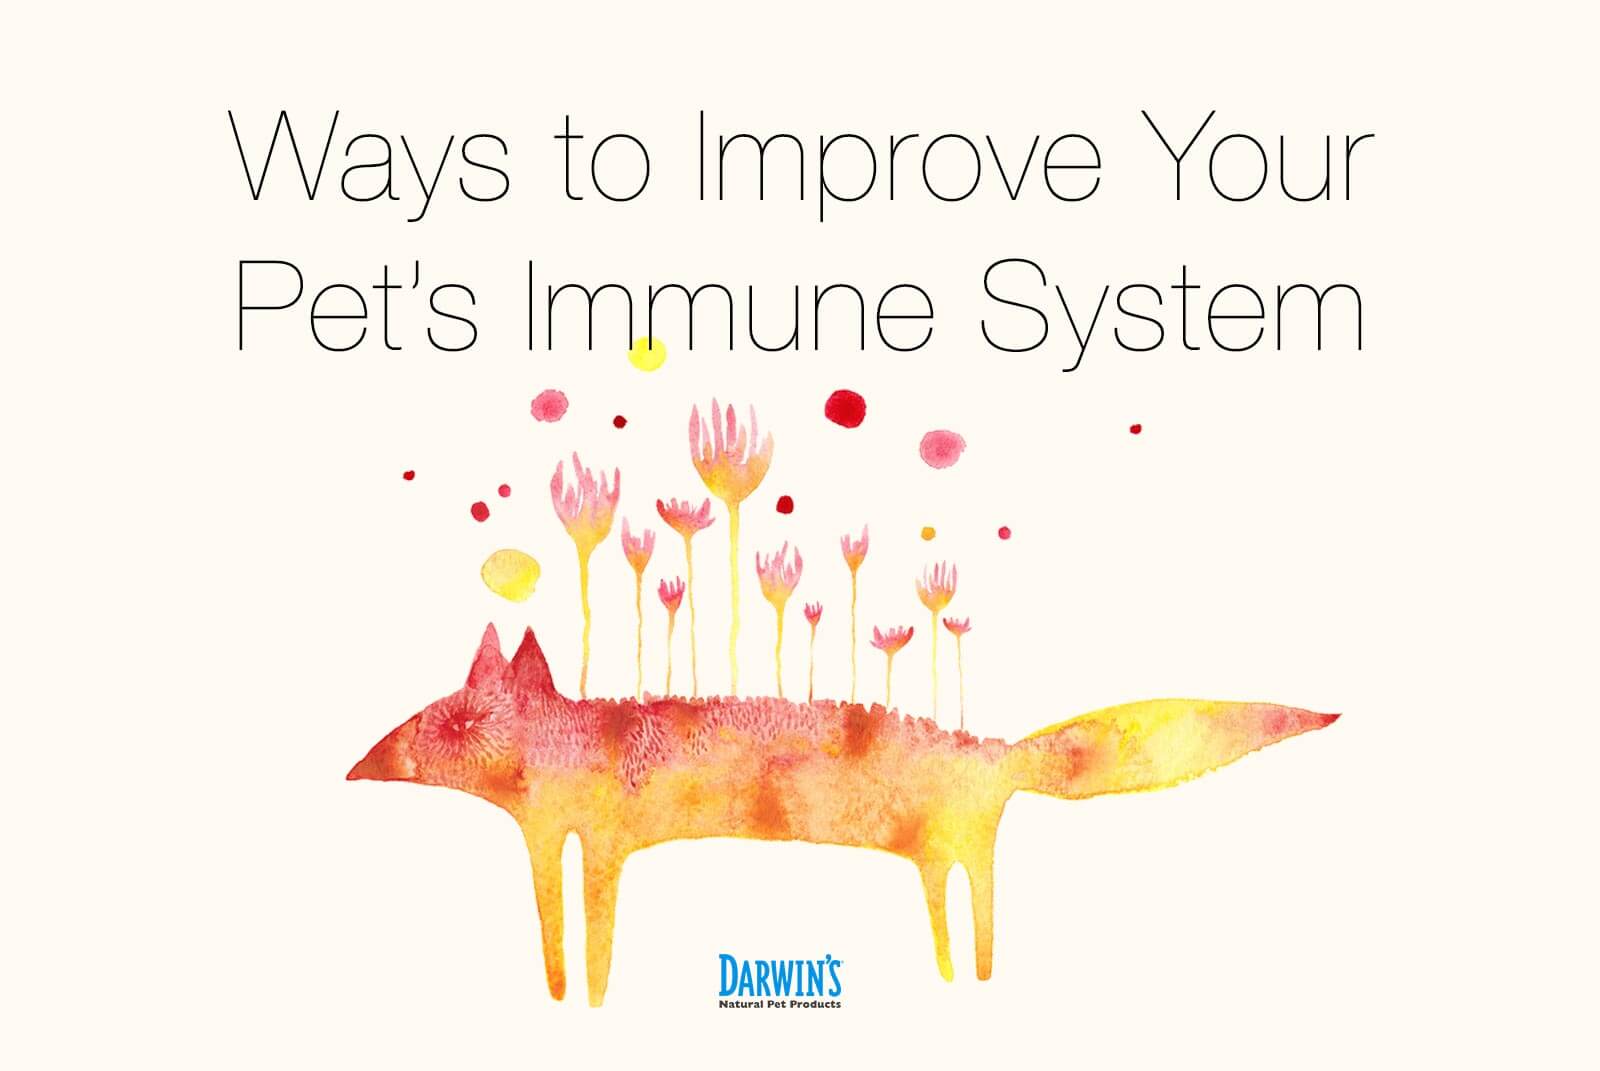 10 Ways to Support Your Pet’s Immune System